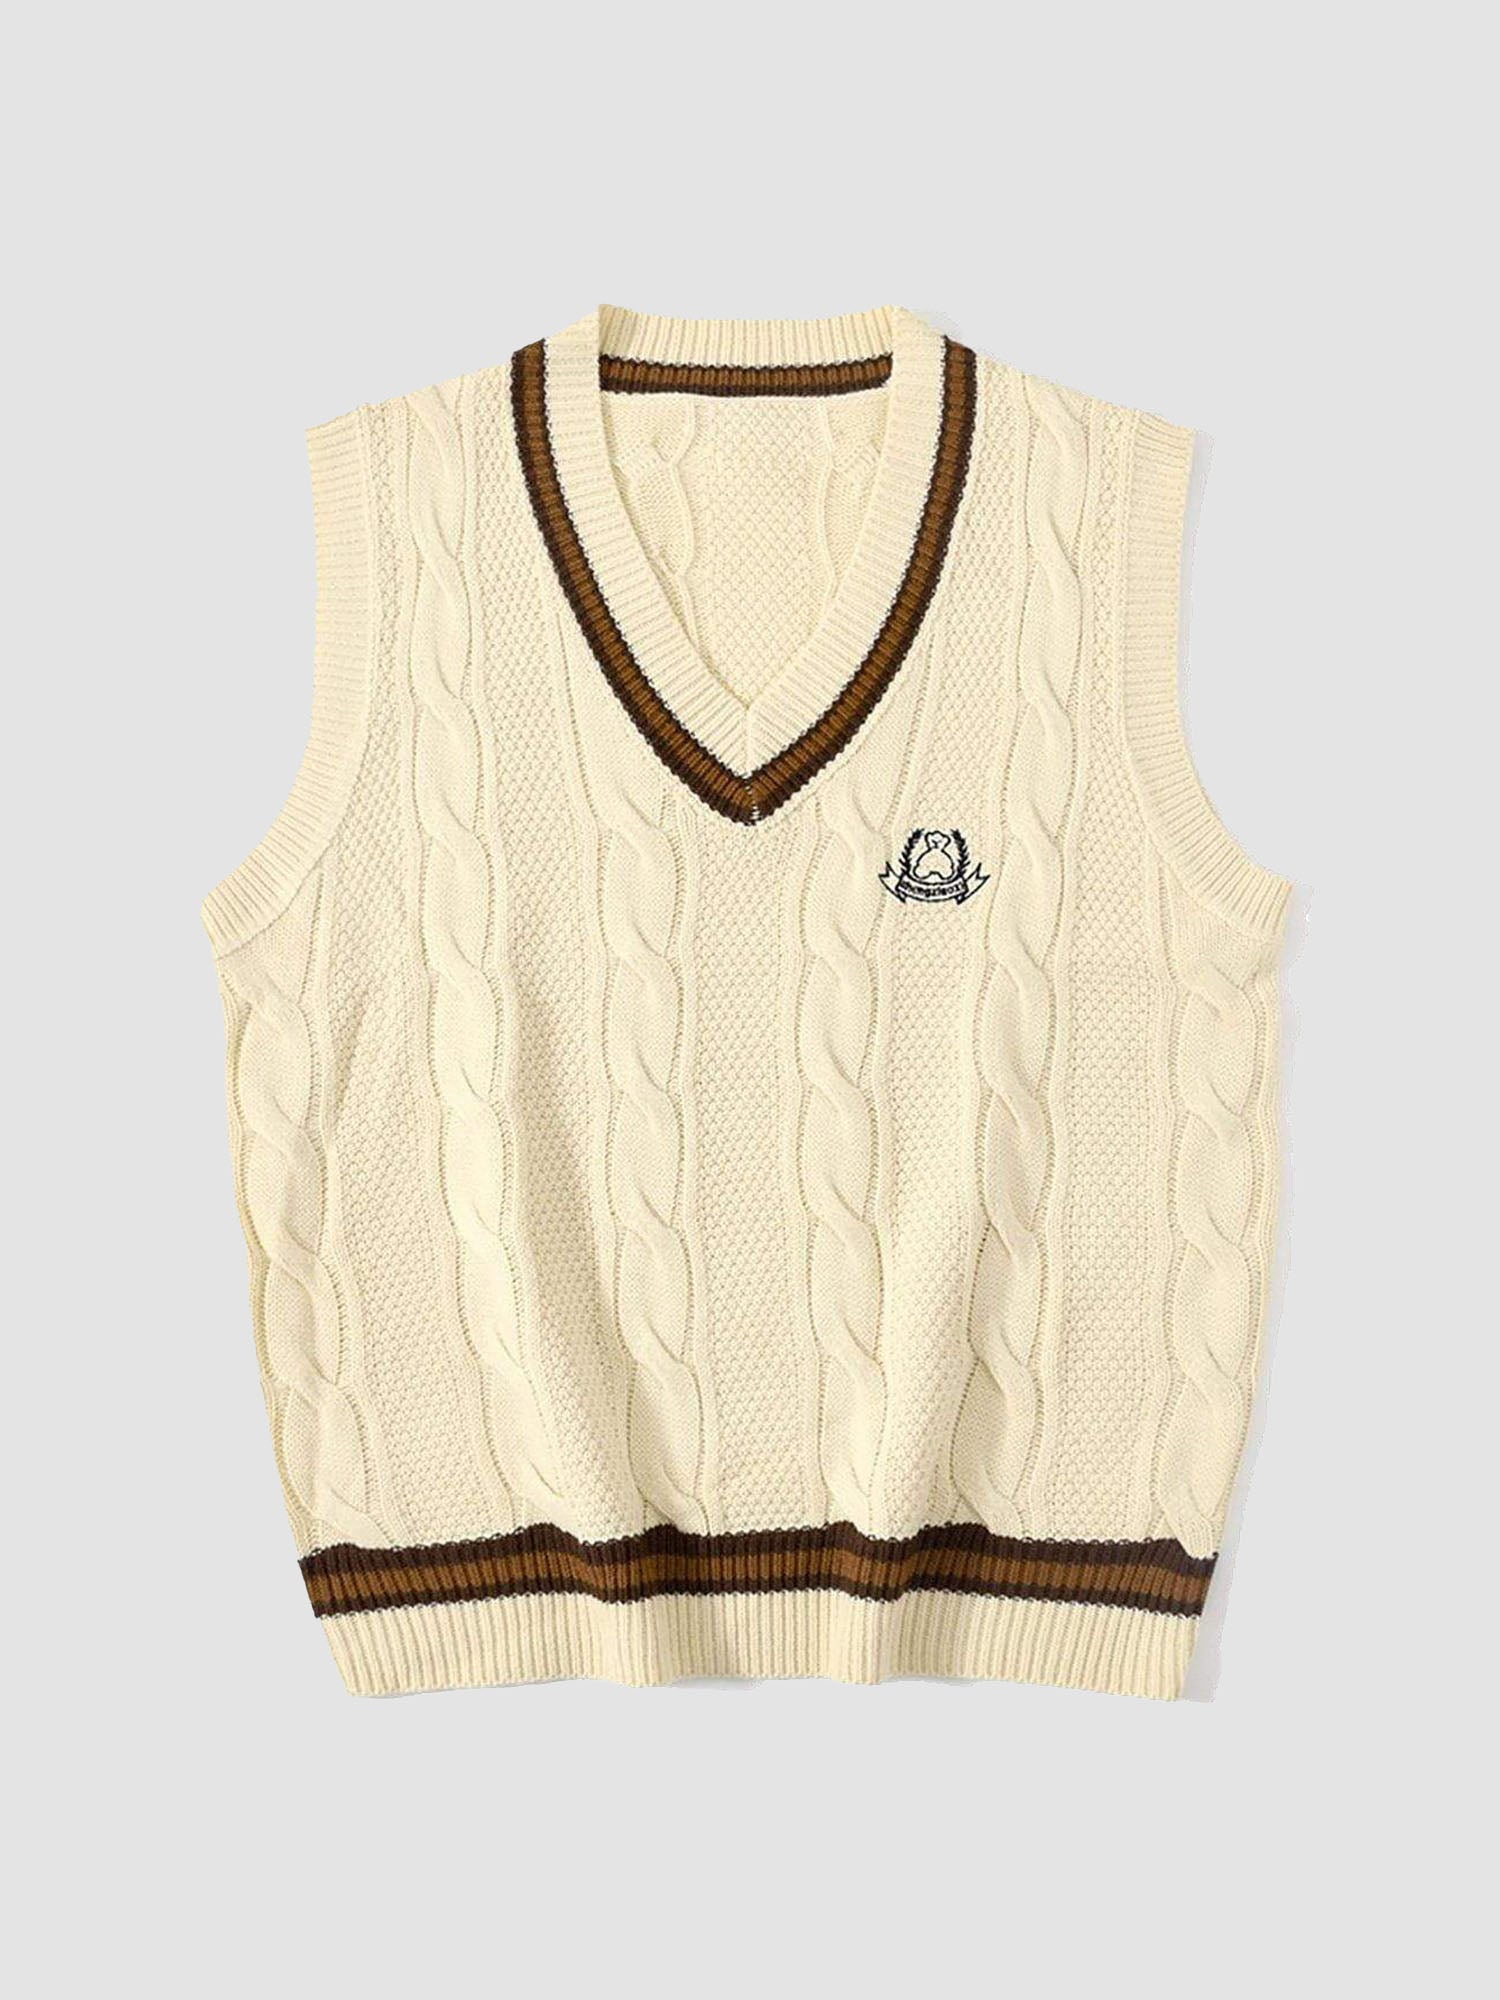 JUSTNOTAG Retro Campus Style Knitted Sweater Vest